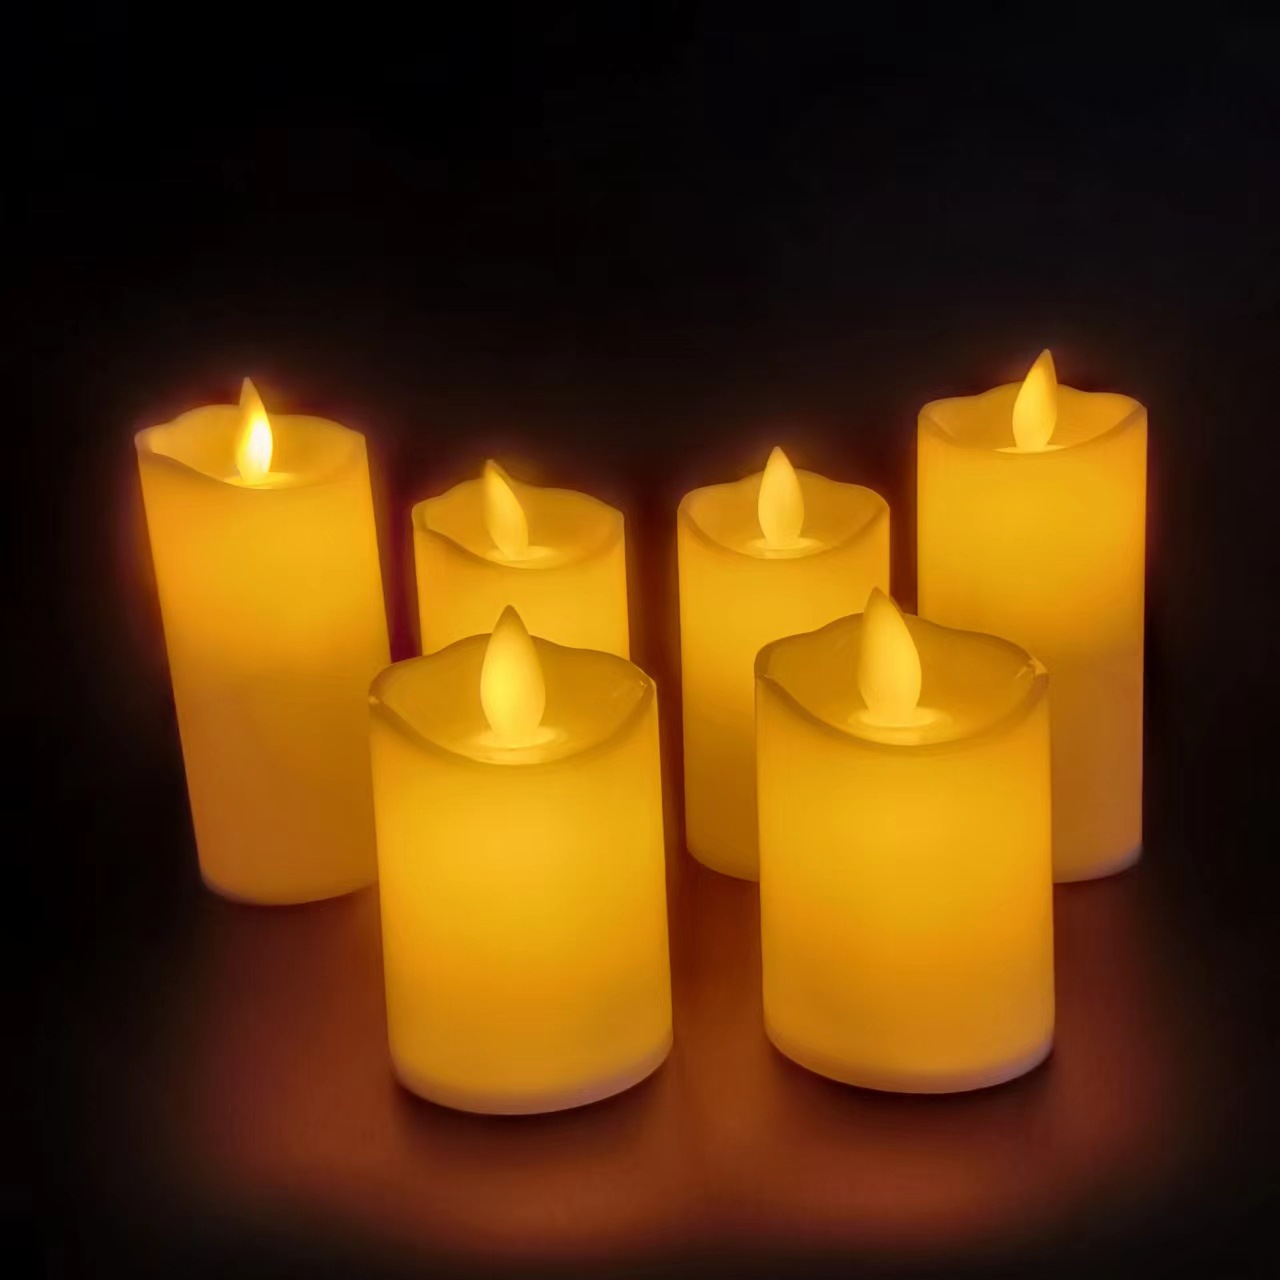 LED Electric Candle Lamp Plastic Diameter 5cm Scene Layout Creative Pattern Swing Wave Simulation Candle